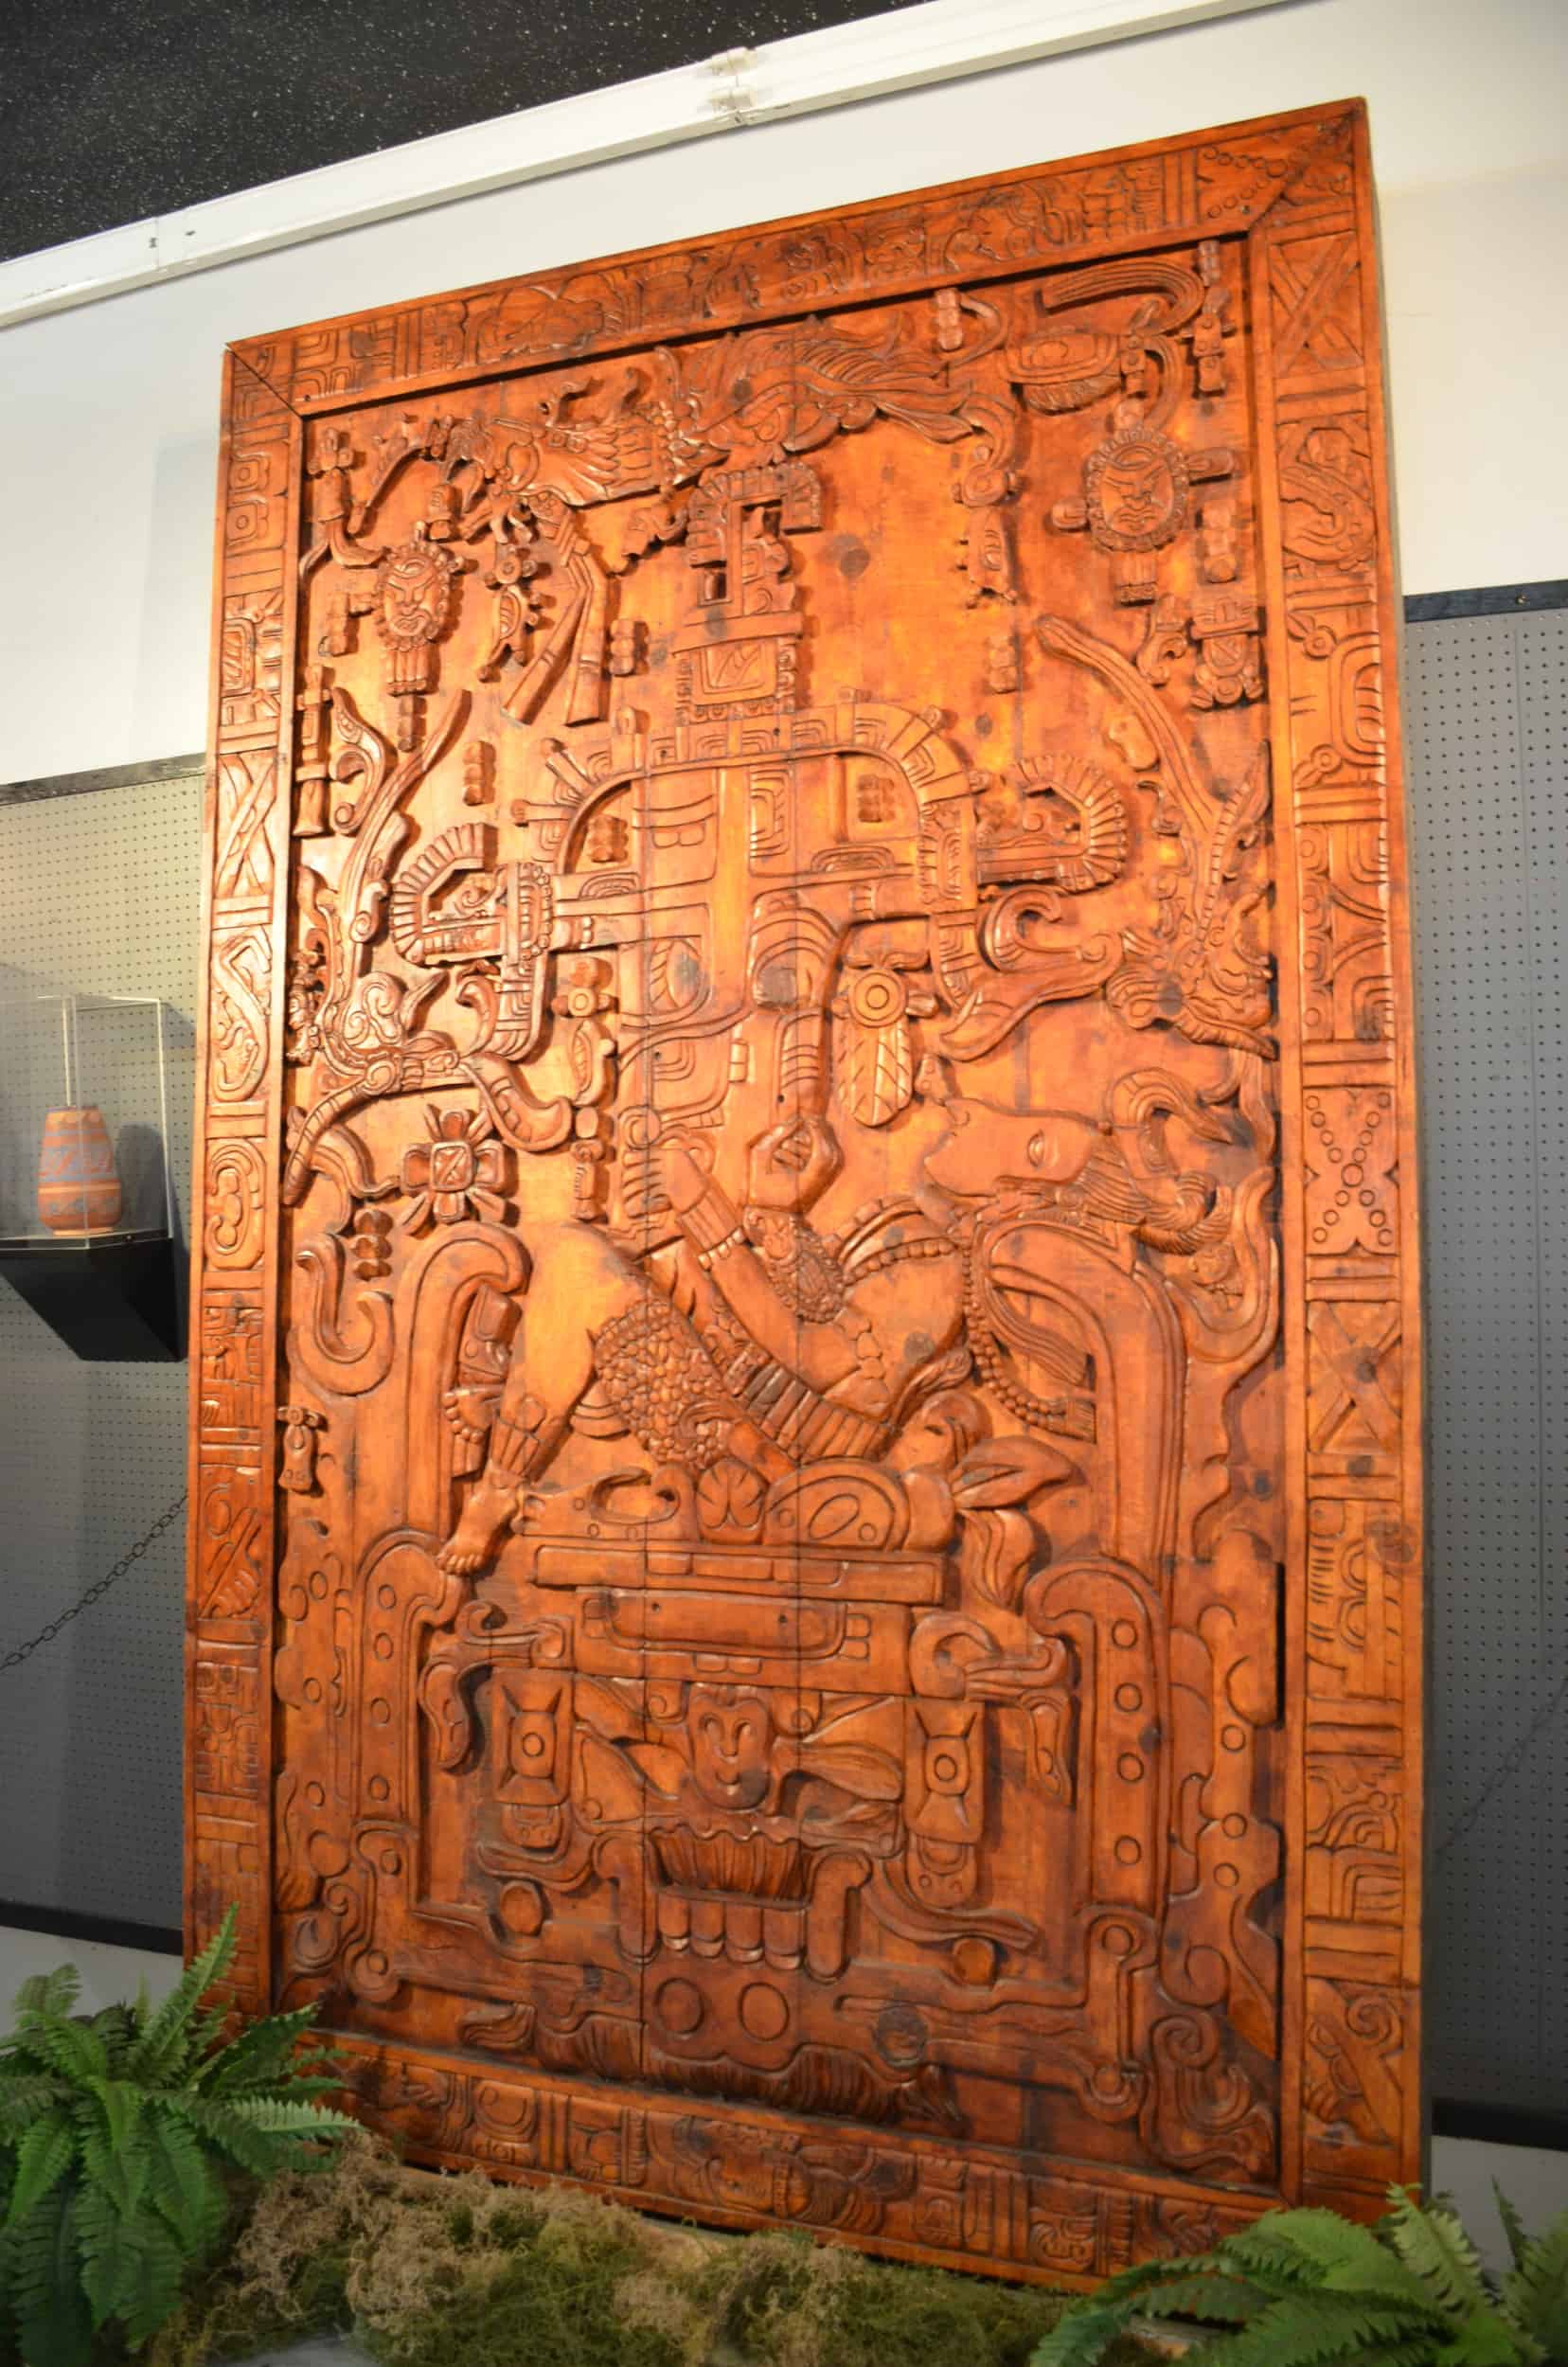 Replica of the Palenque Astronaut sarcophagus lid at the International UFO Museum and Research Center in Roswell, New Mexico